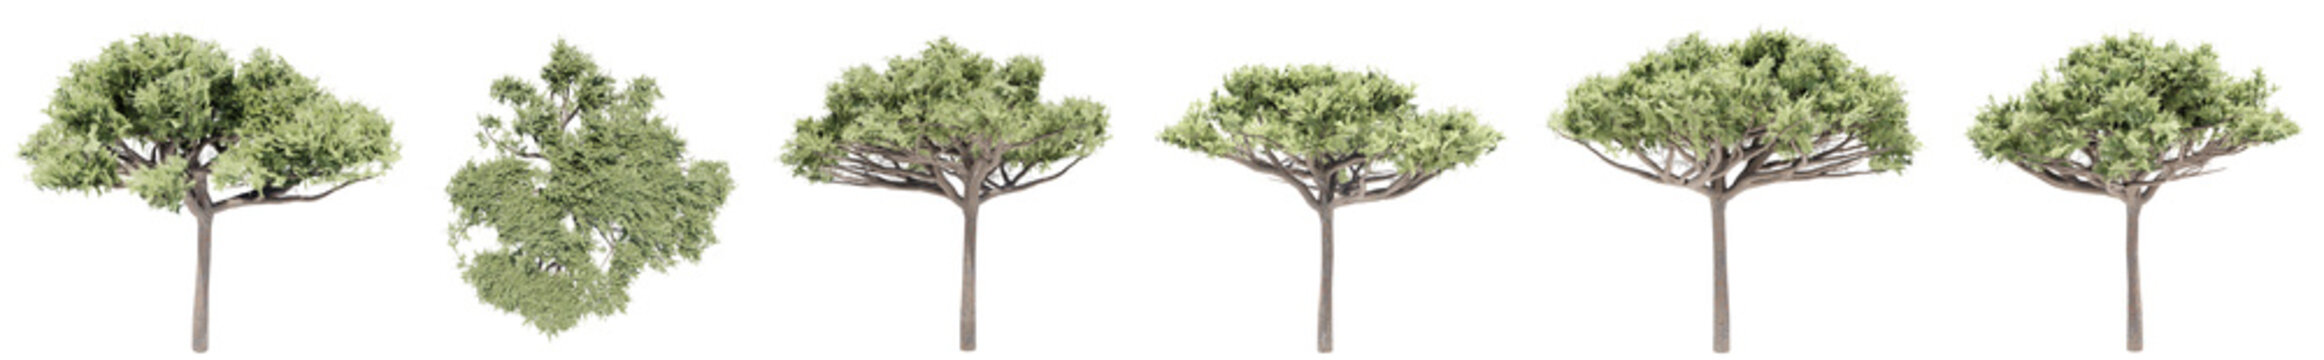 Set or collection of green stone pine trees isolated on white background. Concept or conceptual 3d illustration for nature, ecology and conservation, strength and endurance, force and life